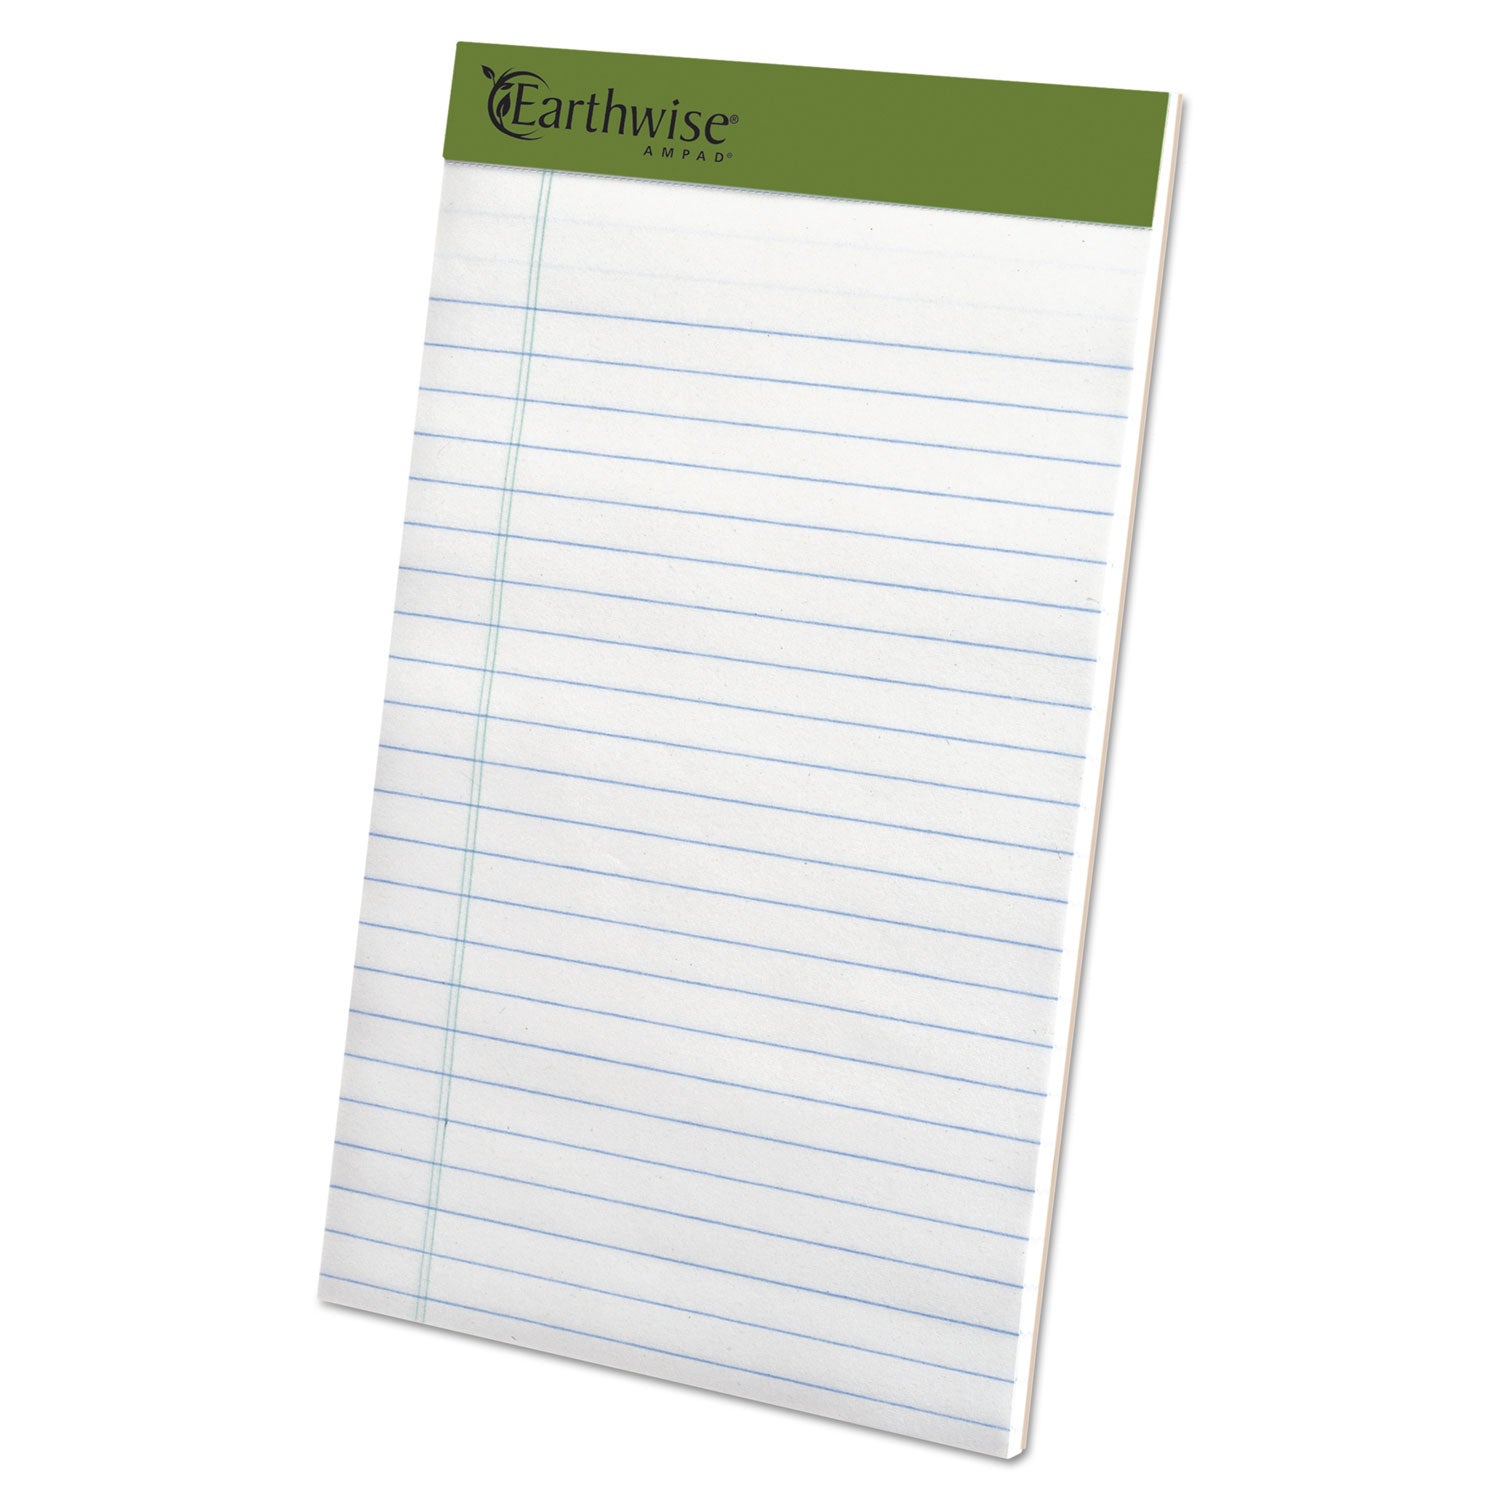 earthwise-by-ampad-recycled-paper-legal-pads-wide-legal-rule-40-white-5-x-8-sheets-6-pack_top40112 - 1